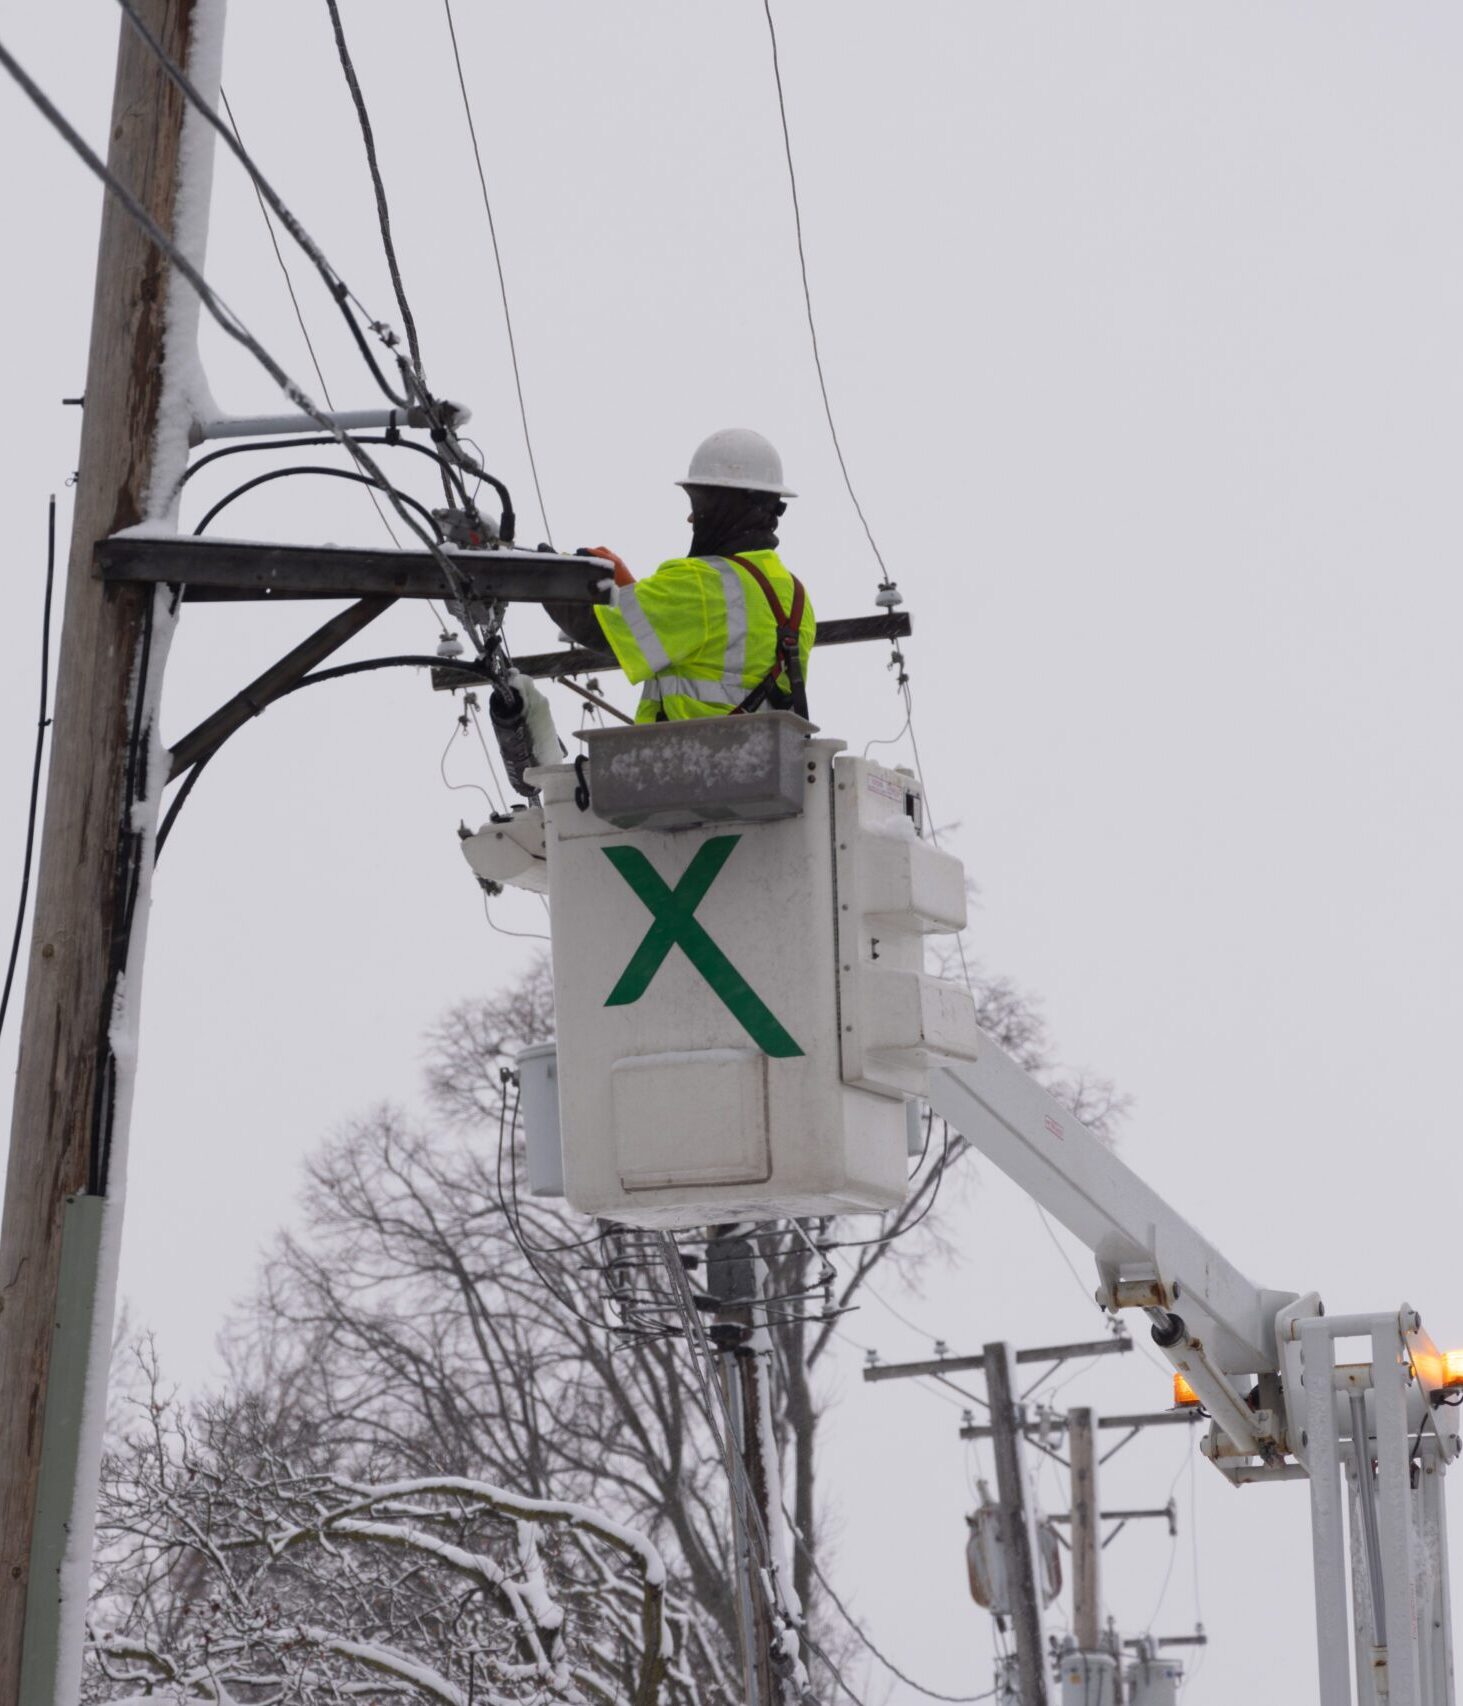 Response team Xfinity technician in a bucket truck works to repair the network during winter storm to return connectivity to customers.